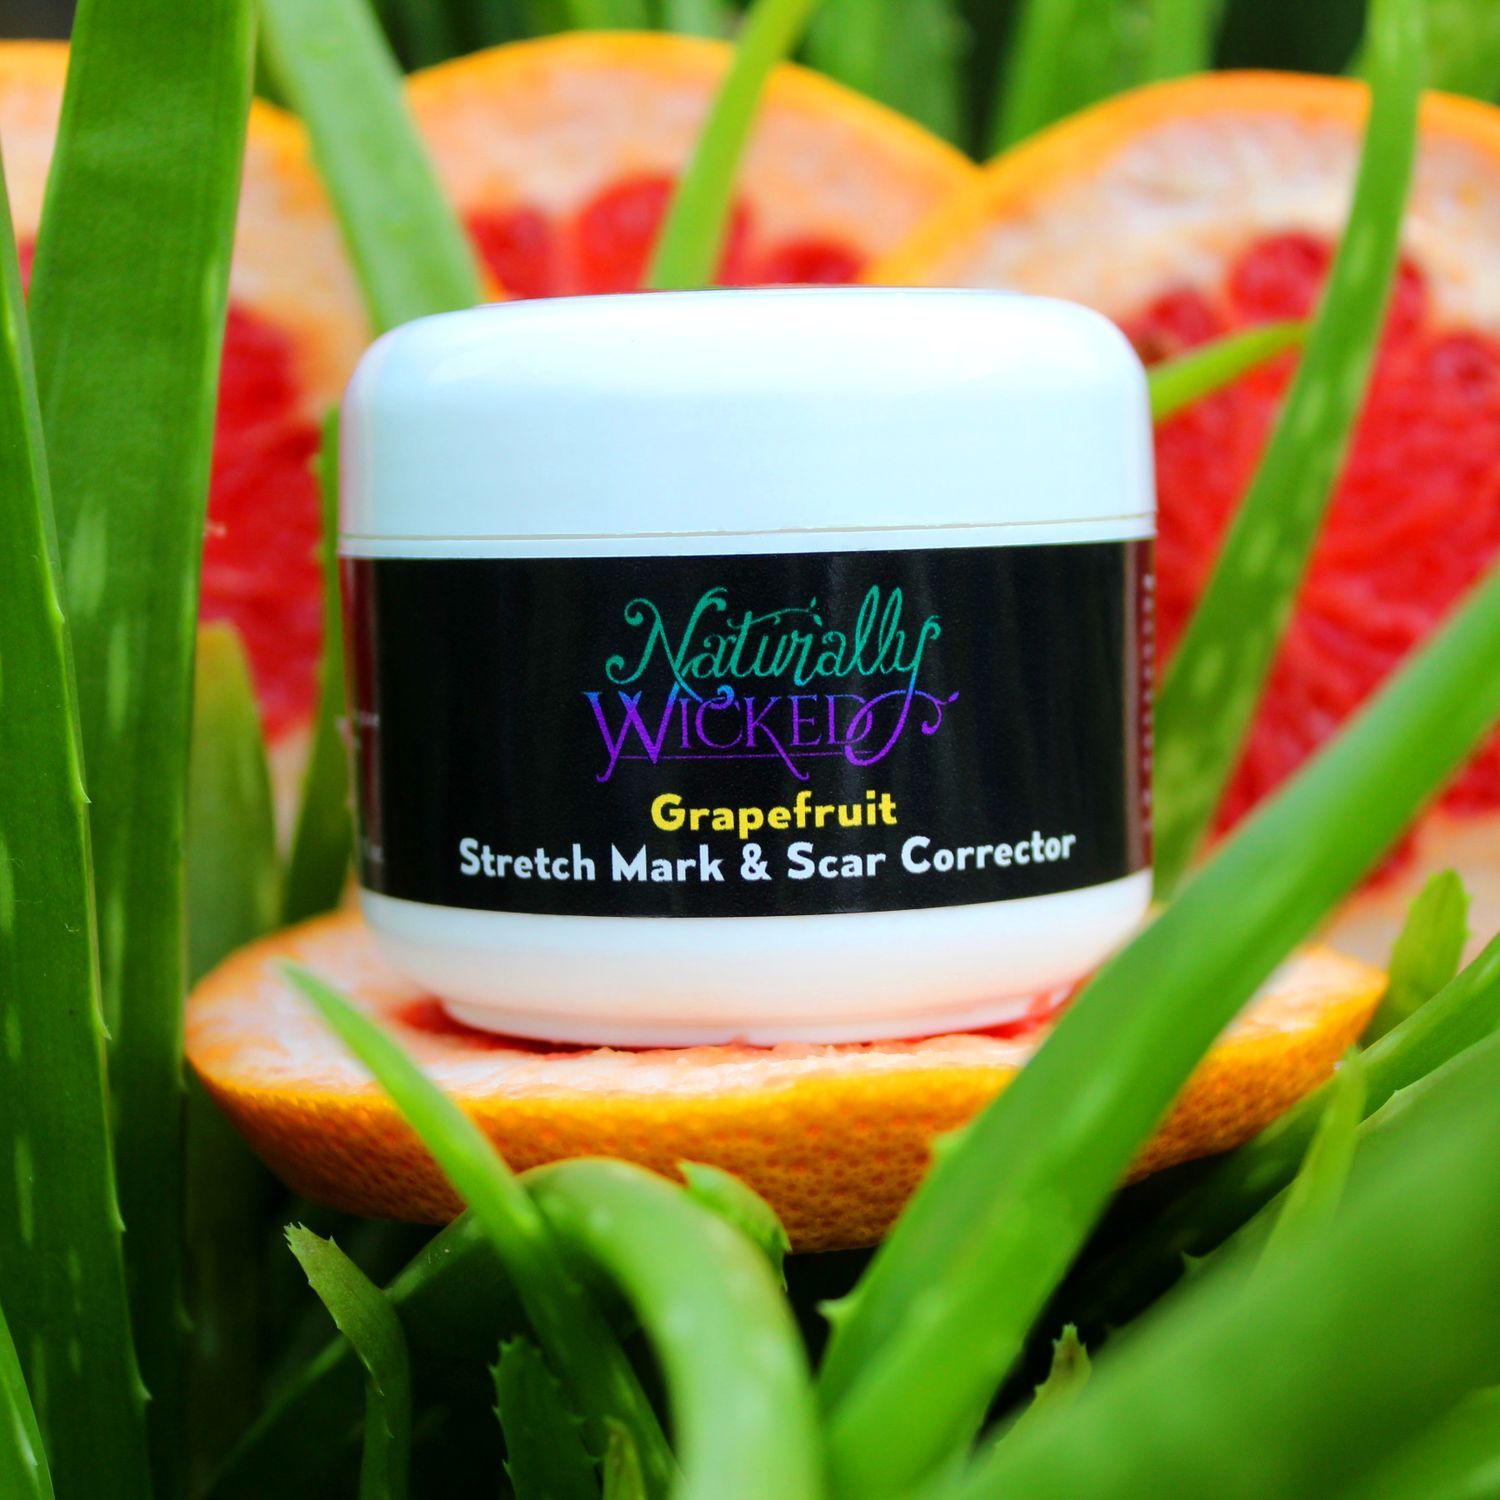 Naturally Wicked Stretch Mark & Scar Corrector Sat In Green Aloe Vera On Top Of Bright Pink Grapefruit With Orange Skin